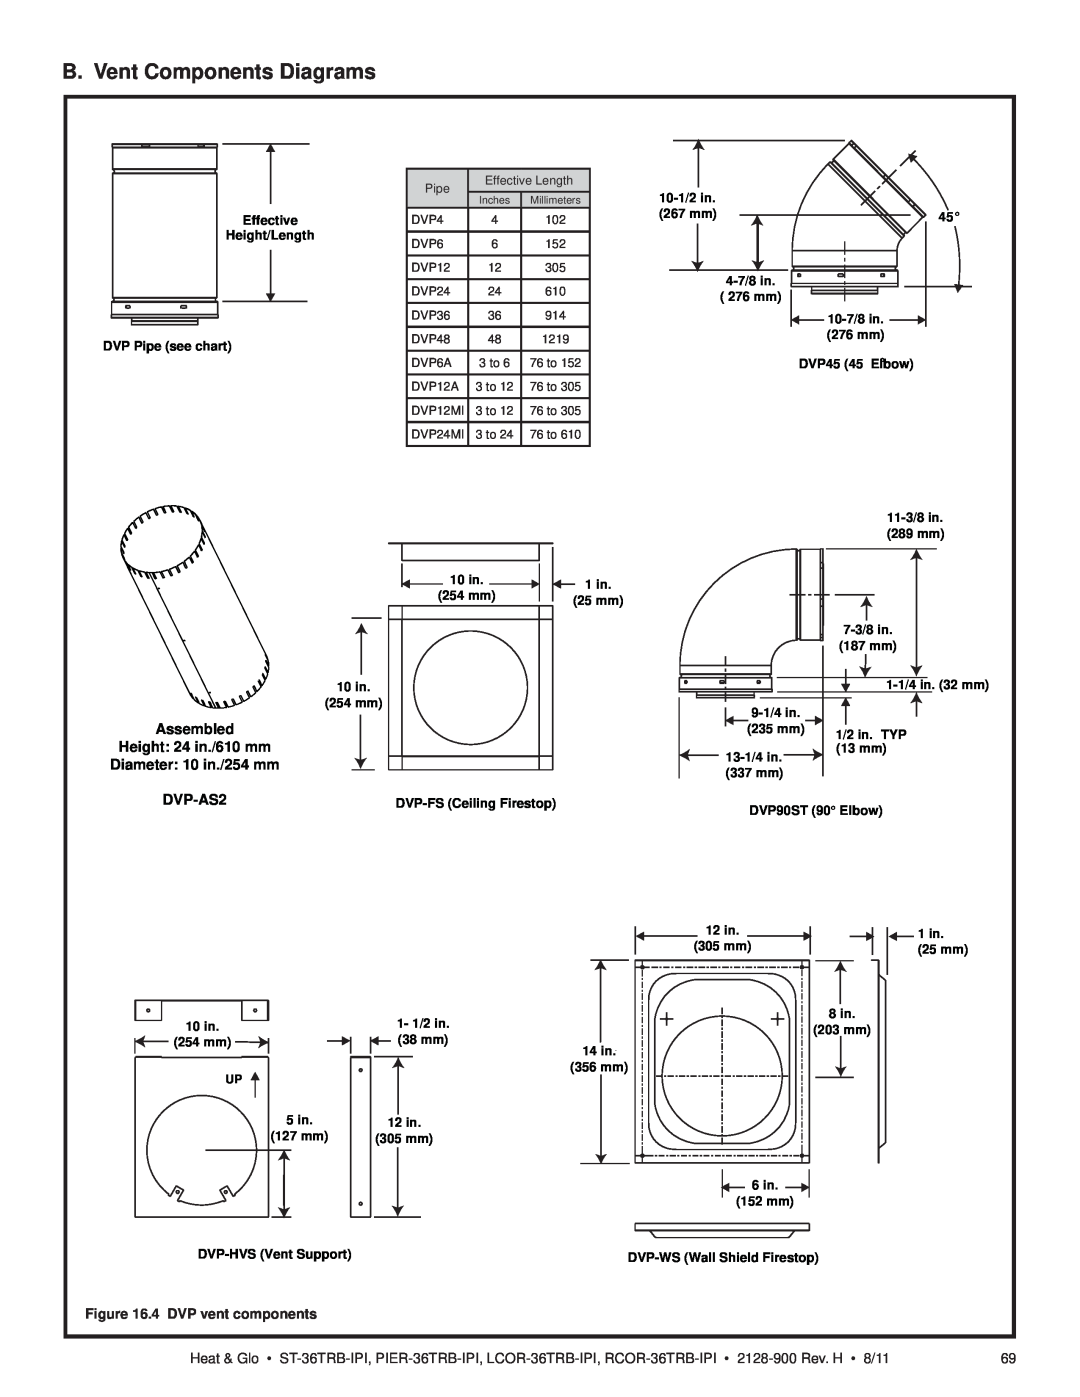 Heat & Glo LifeStyle ST-36TRB-IPI owner manual B. Vent Components Diagrams, Height: 24 in./610 mm, DVP-AS2, Assembled 